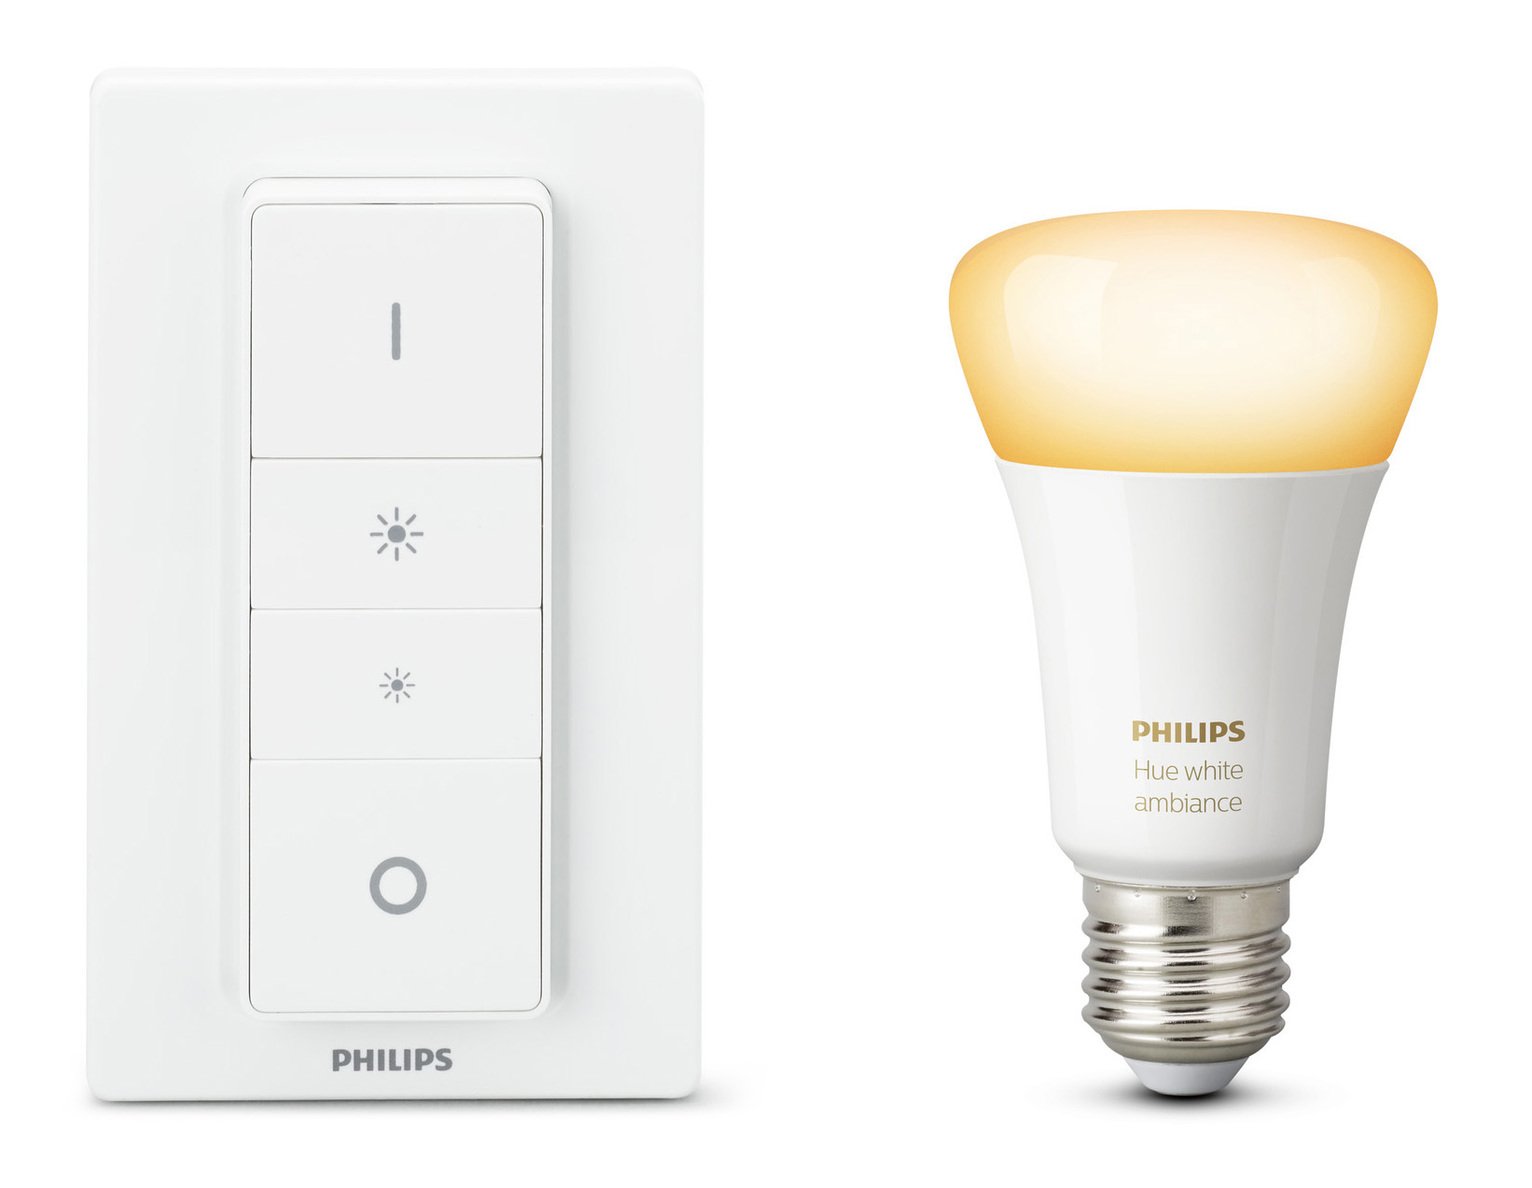 Philips Hue Light Recipe Kit Dimmer and White Ambiance Bulb.